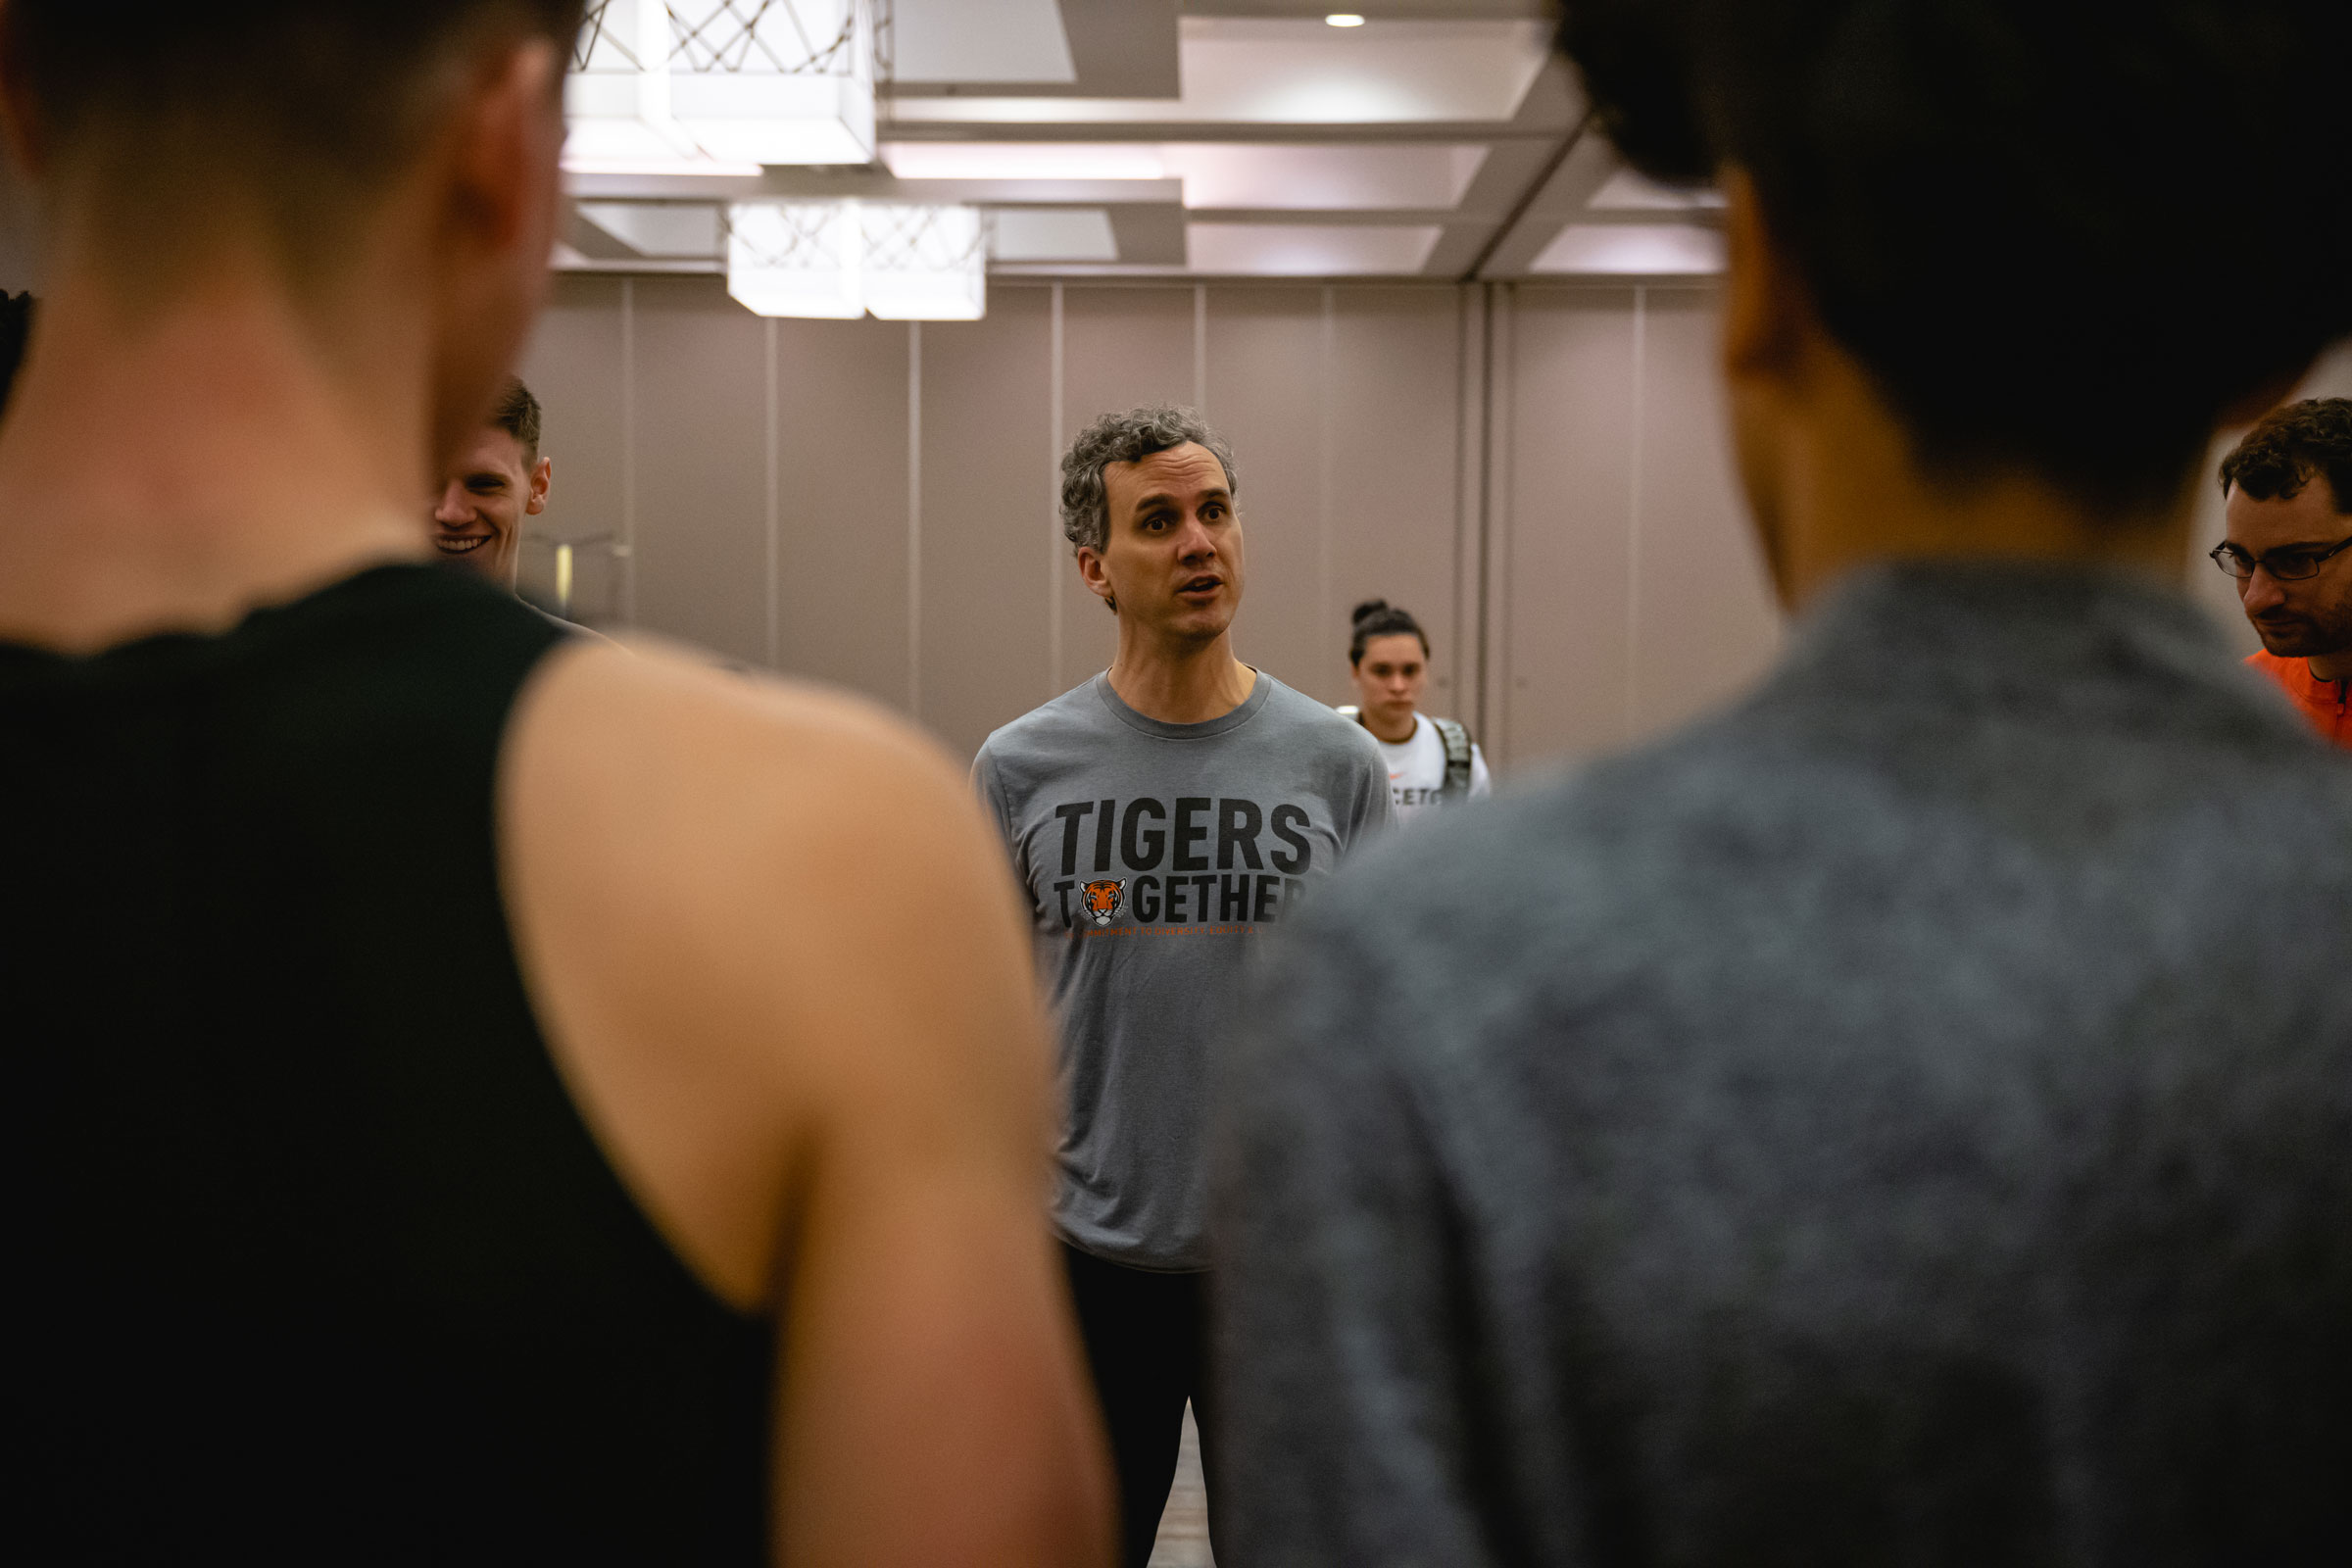 Coach Mitch Henderson speaks with the team during a practice session at the Hyatt Regency Hotel in Louisville, Ky., on March 23, 2023. (Jon Cherry for TIME)